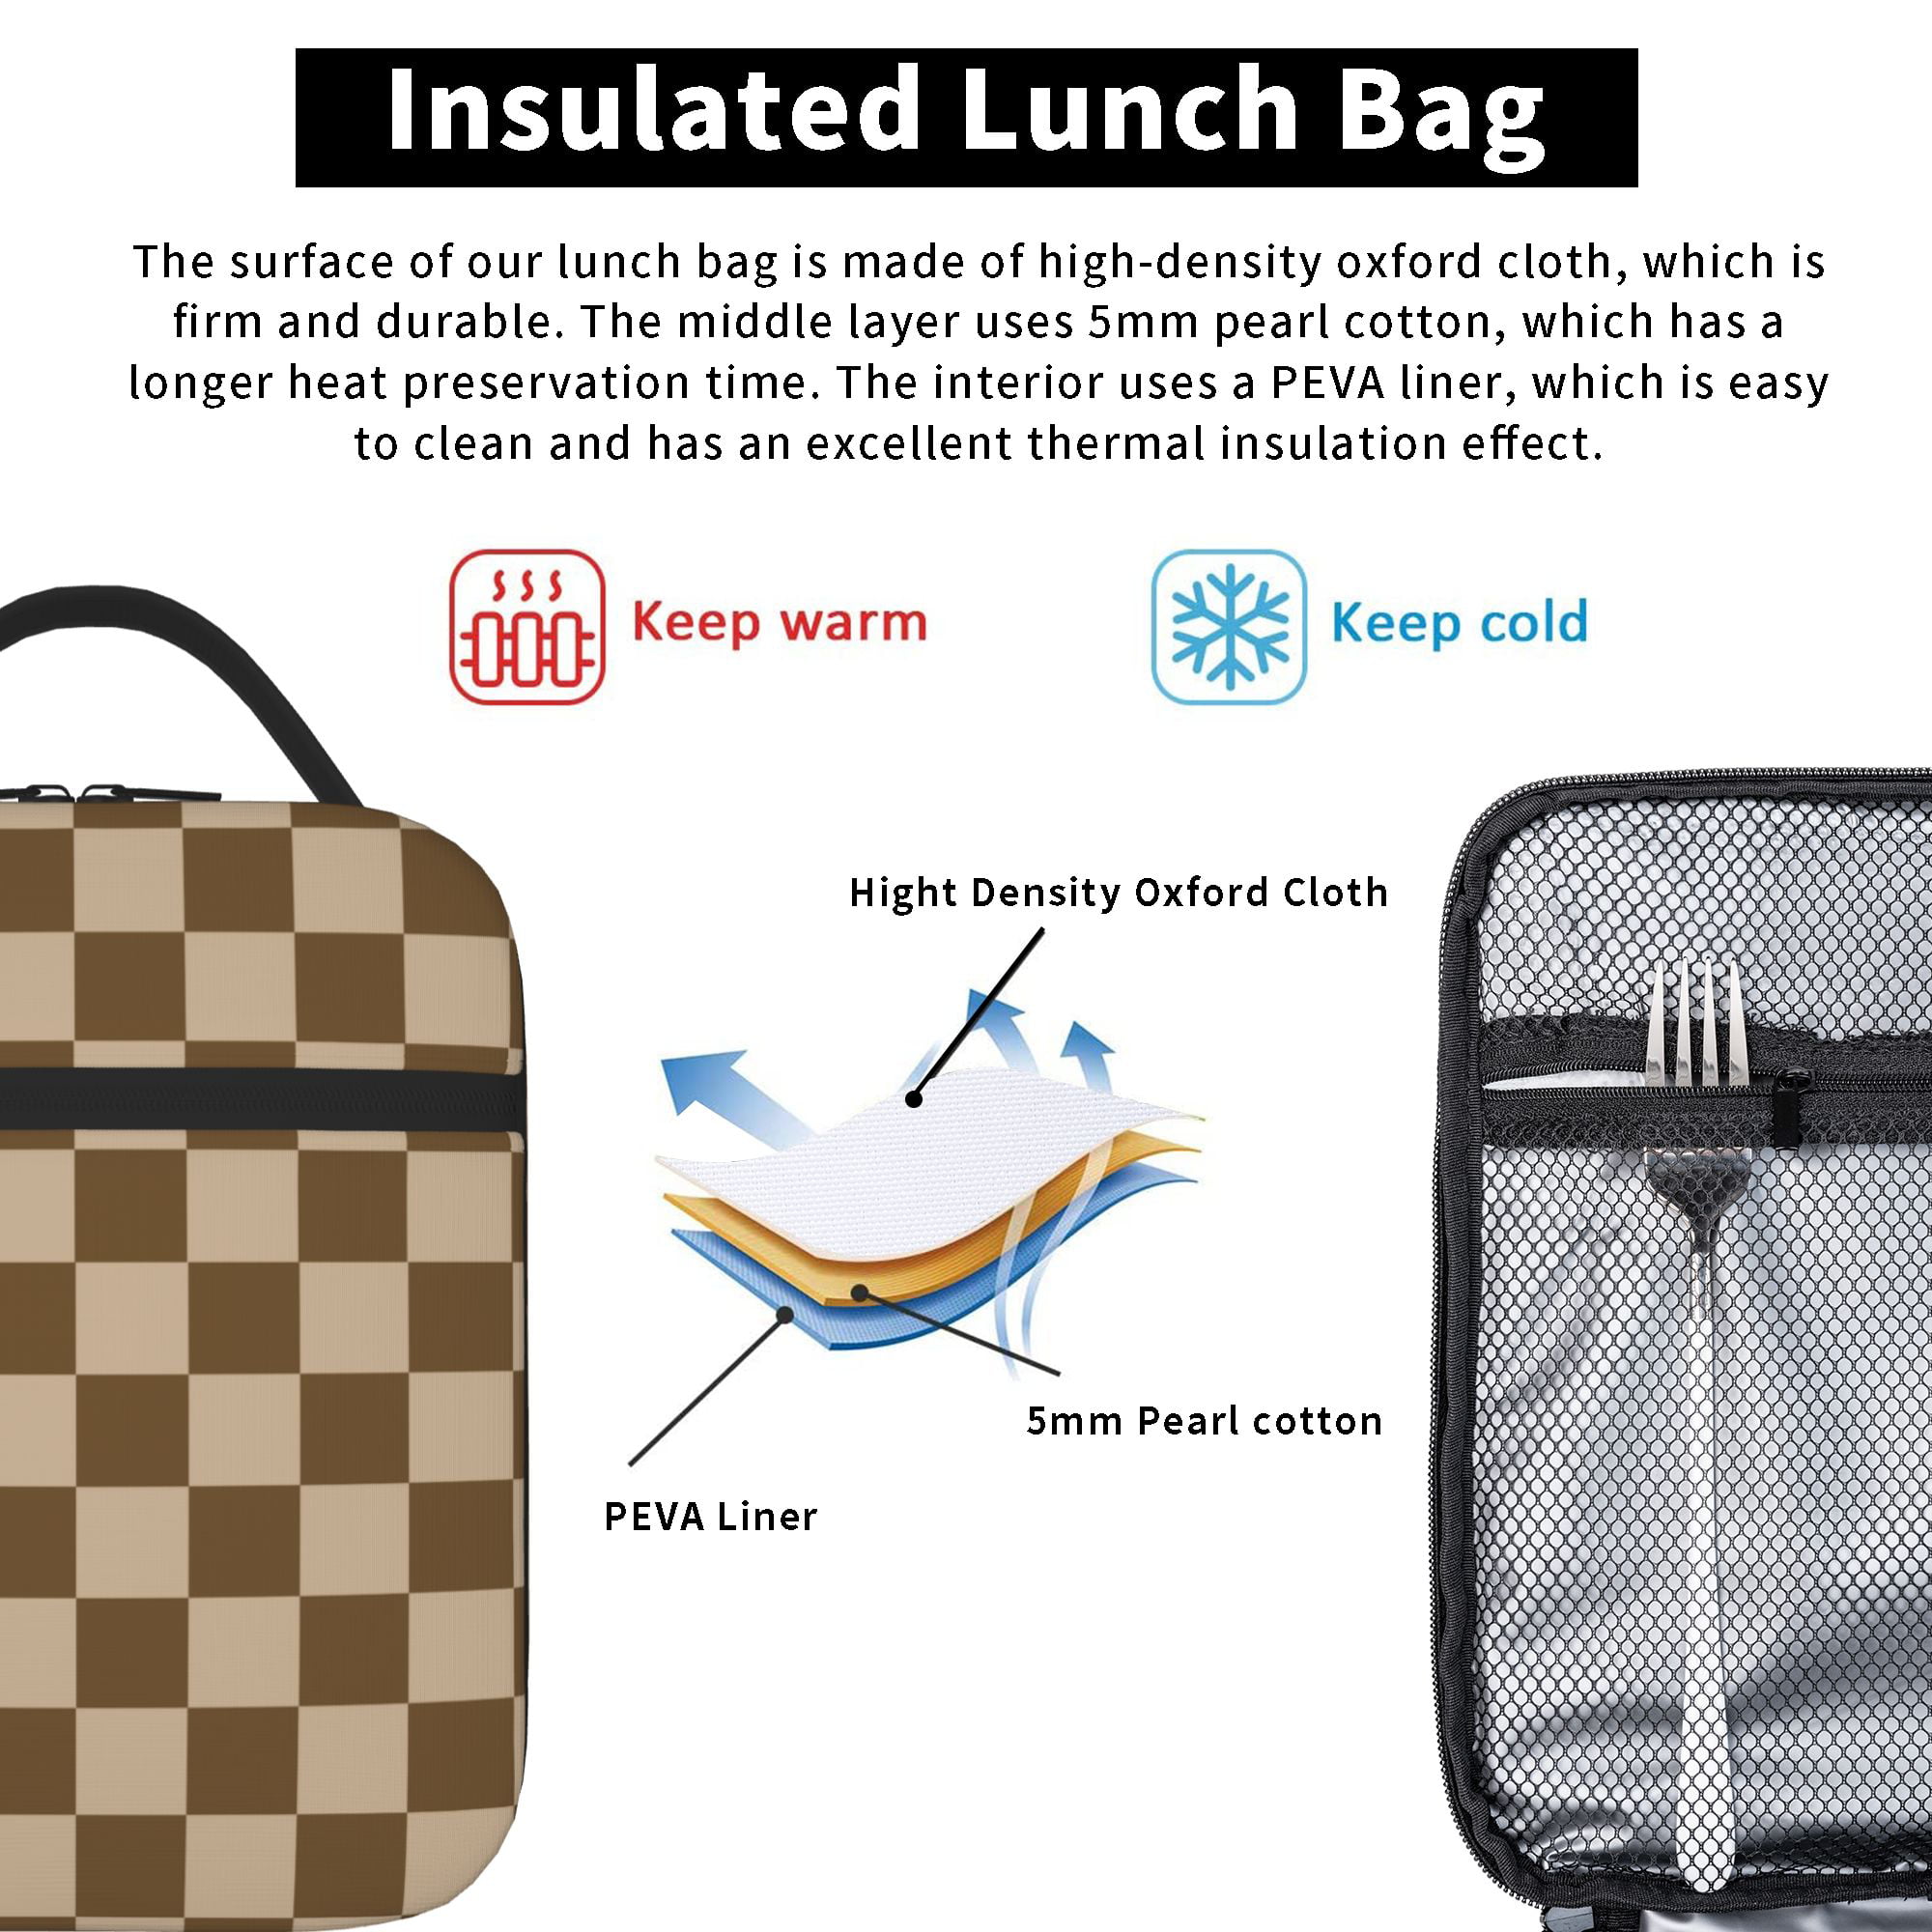 TEQUAN Portable Lunch Bag, Checkerboard Brown Pattern Reusable Insulated Lunch  Box for Travel Work School Picnic 